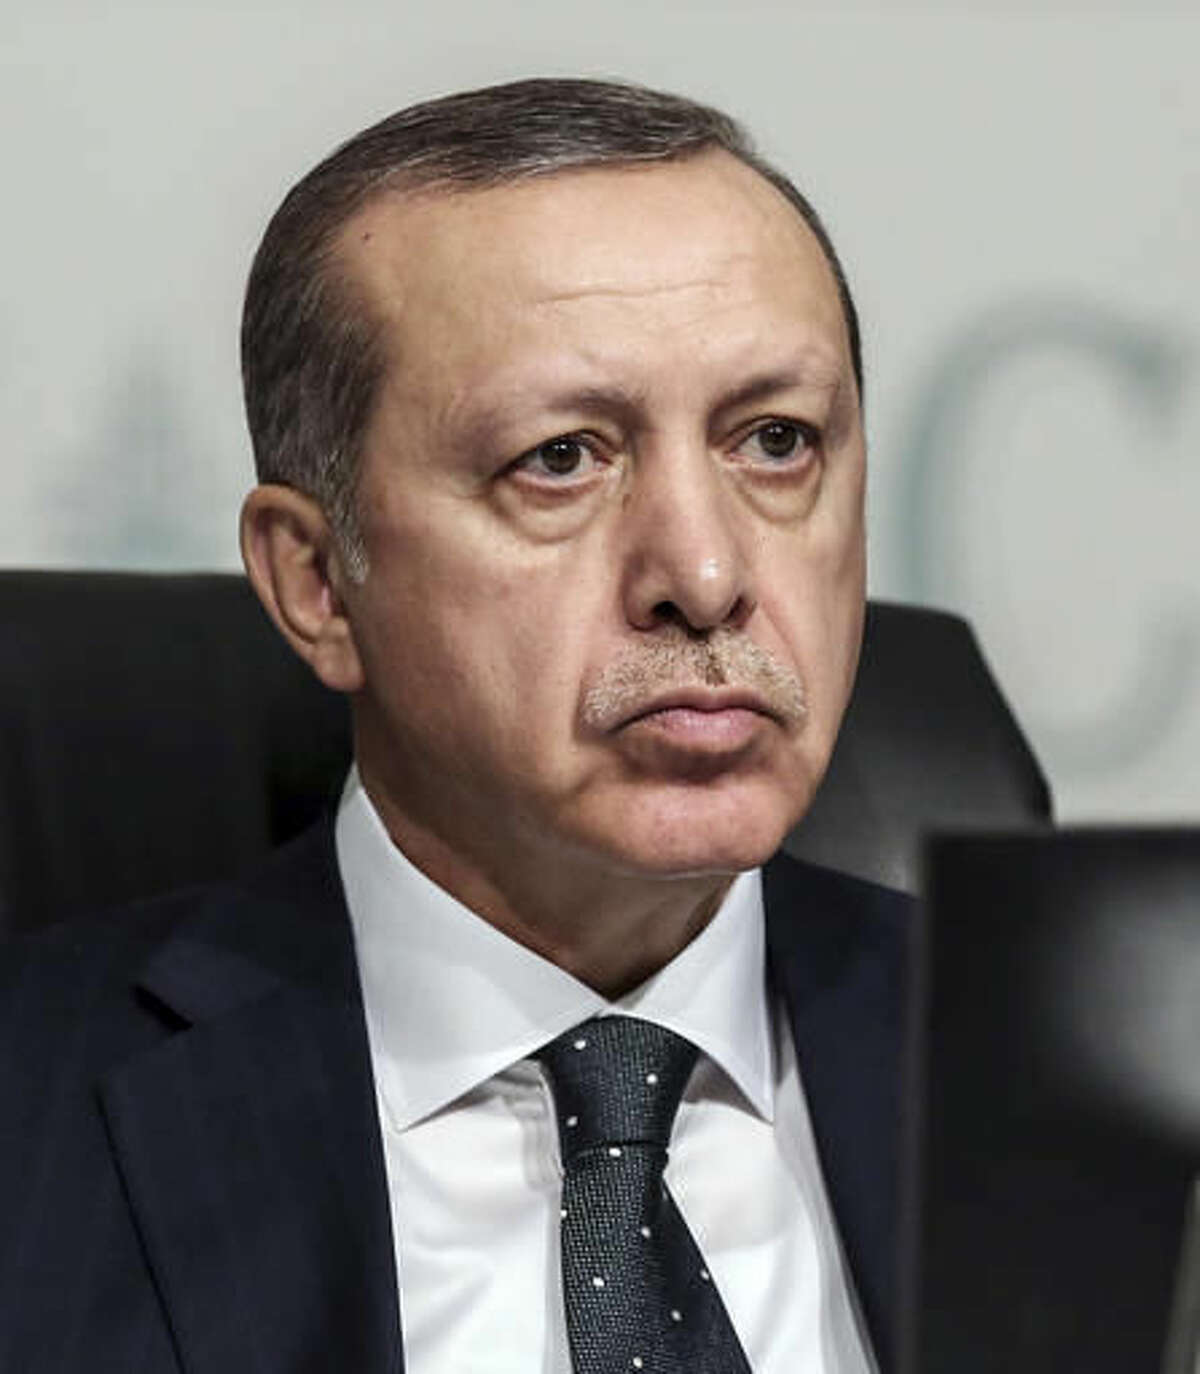 Turkey's President Recep Tayyip Erdogan listens as he attends an annual economy and trade meeting of the Organization for Islamic Cooperation in Istanbul, Wednesday, Nov. 23, 2016. Erdogan declared Wednesday that an upcoming vote in the European Parliament on whether to freeze membership talks with Turkey is of "no value" to his country. (Yasin Bulbul, Presidential Press Service,/Pool Photo via AP)